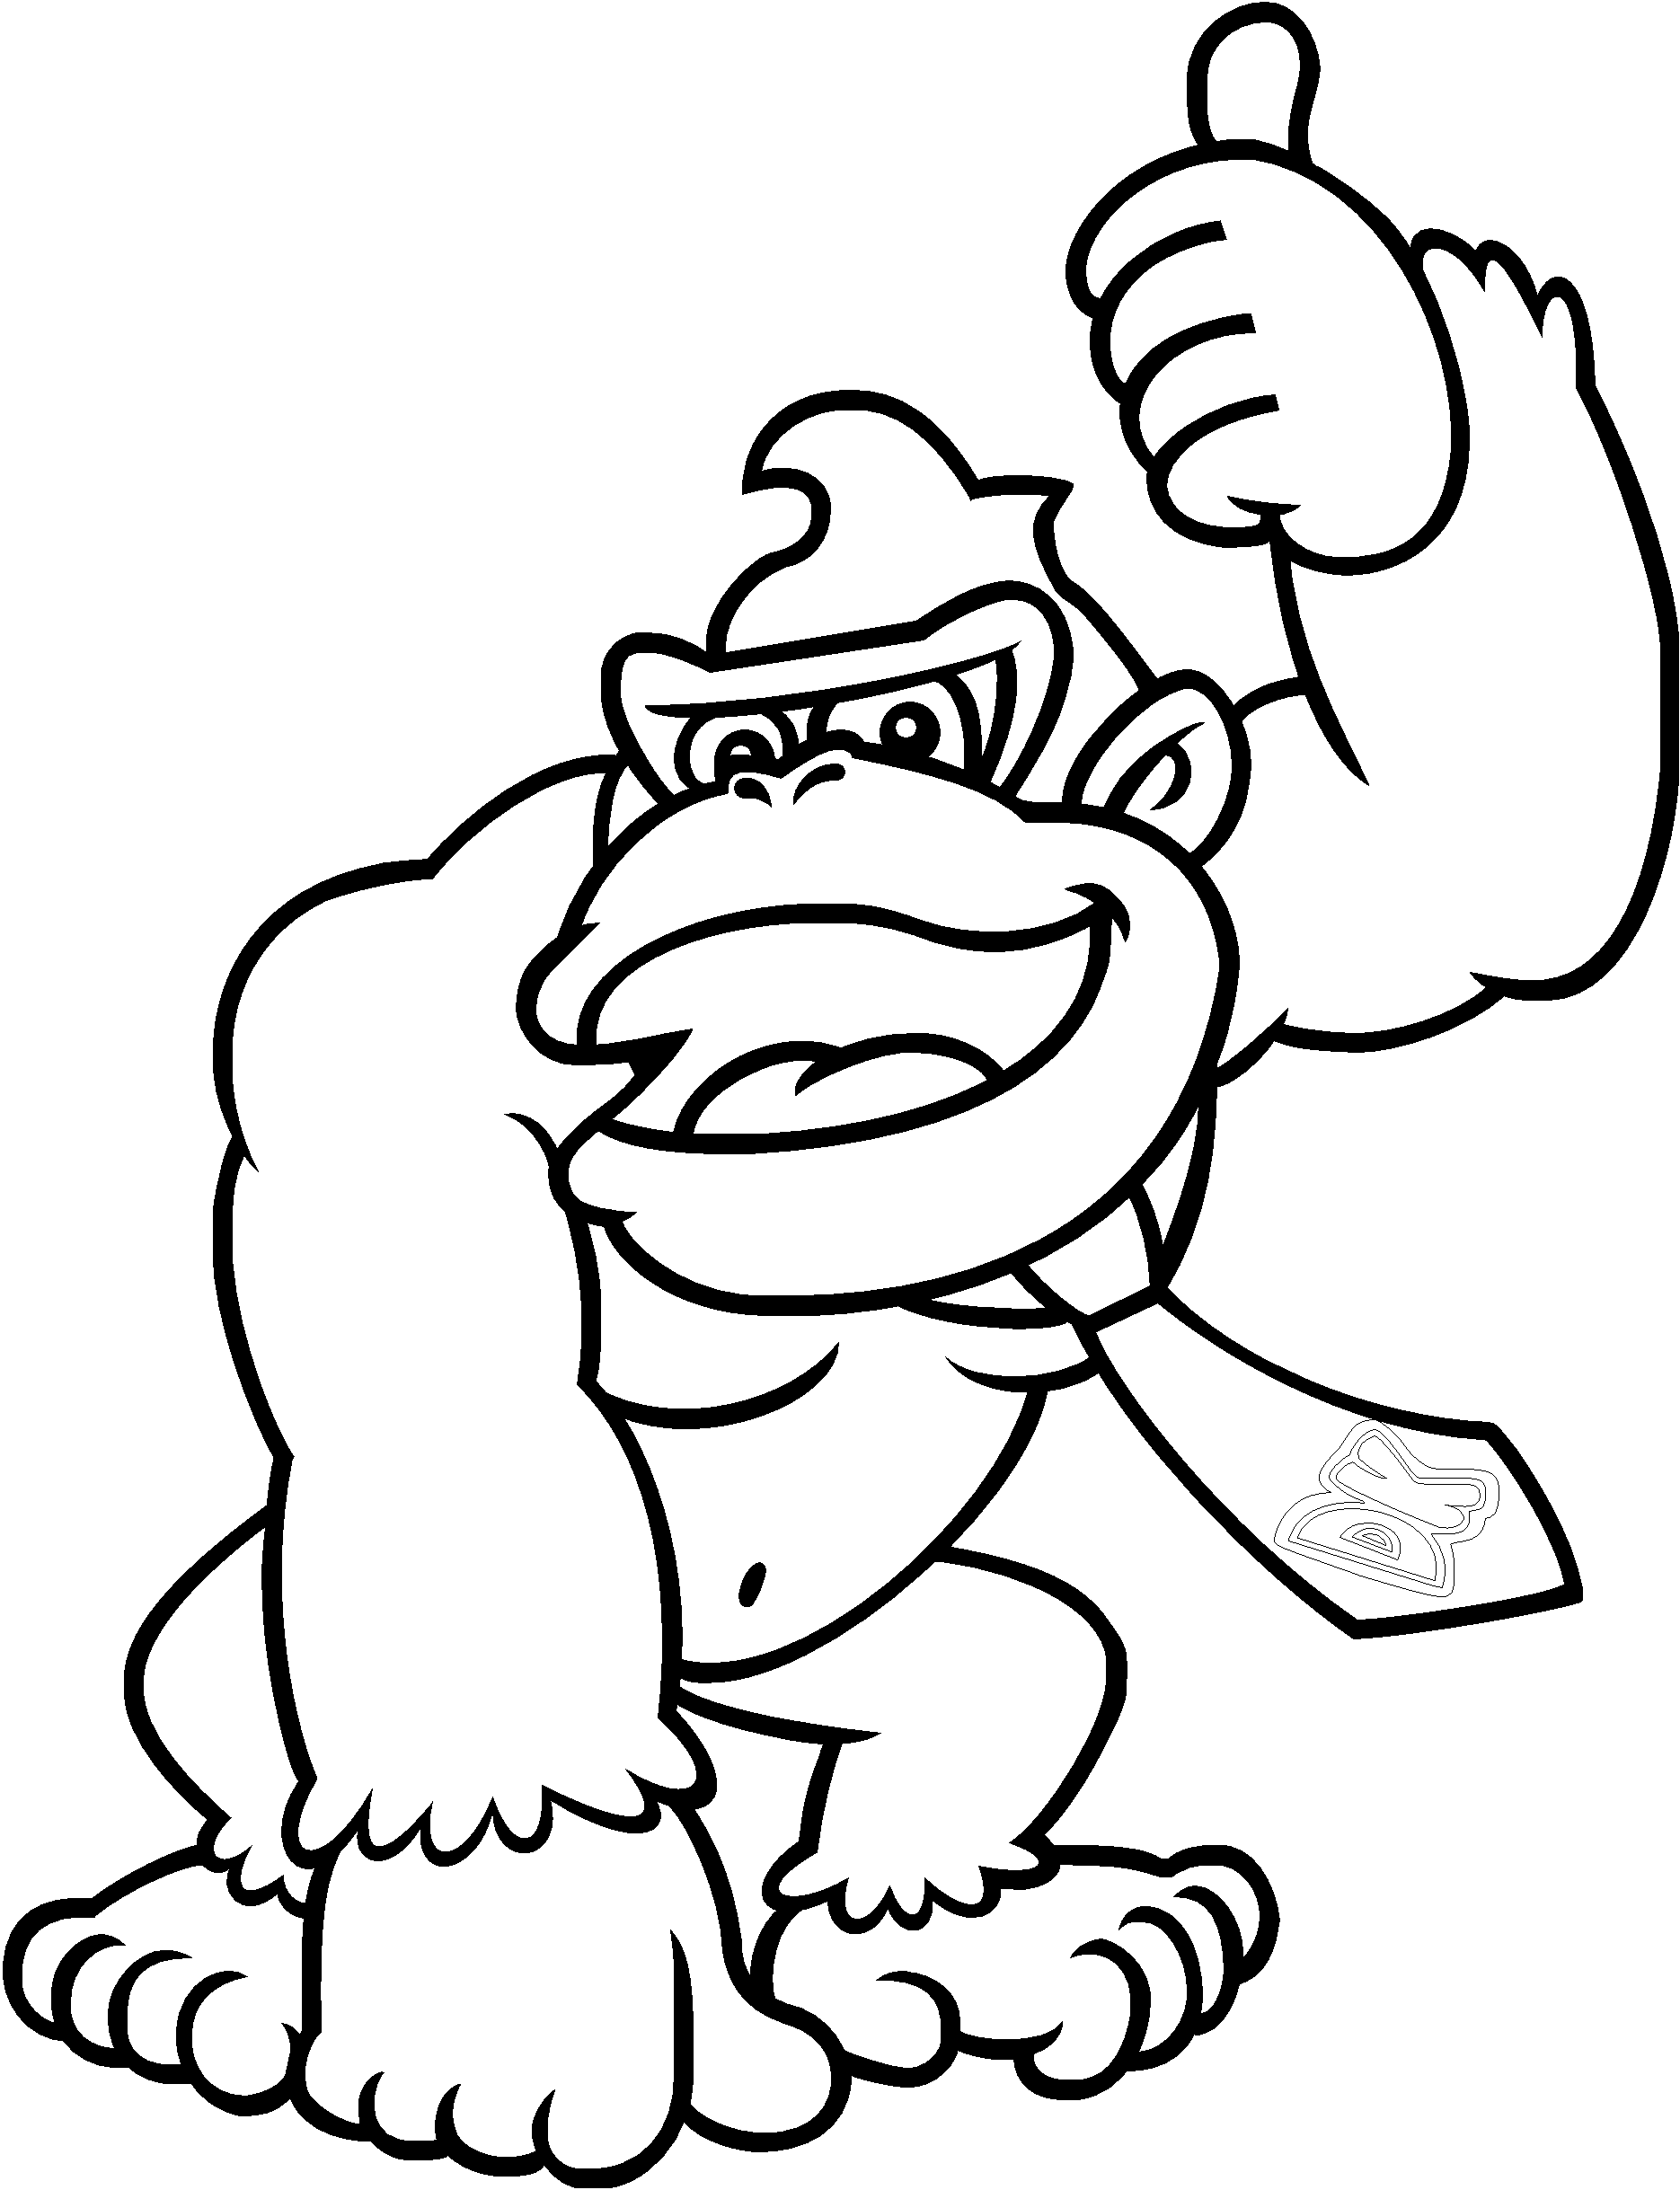 Donkey Kong Coloring Pages Printable   Coloring Home